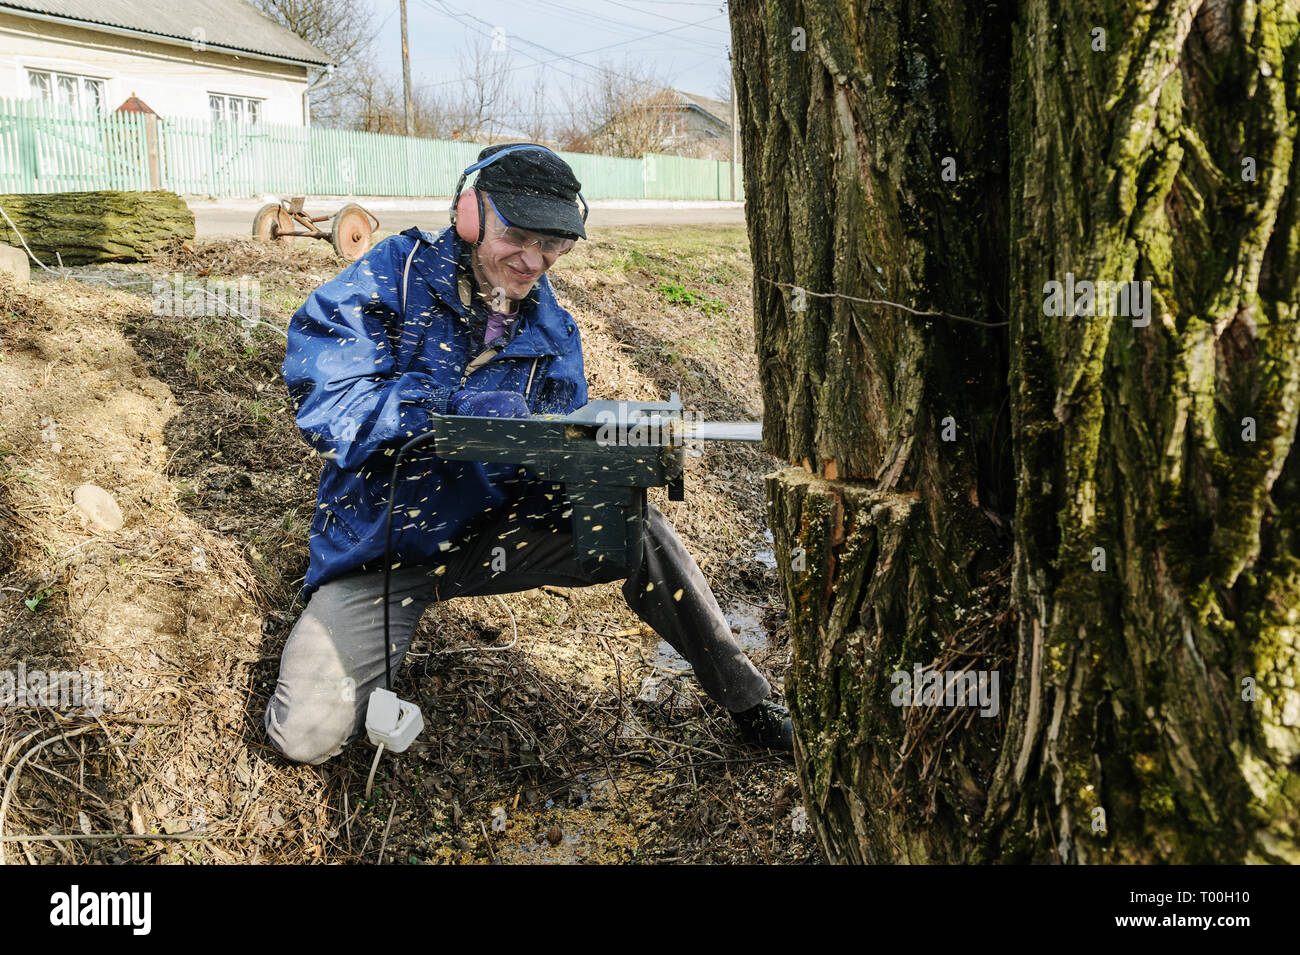 The man in protective gear cutting tree with chain saw. Sawdust shatters the side. Stock Photo